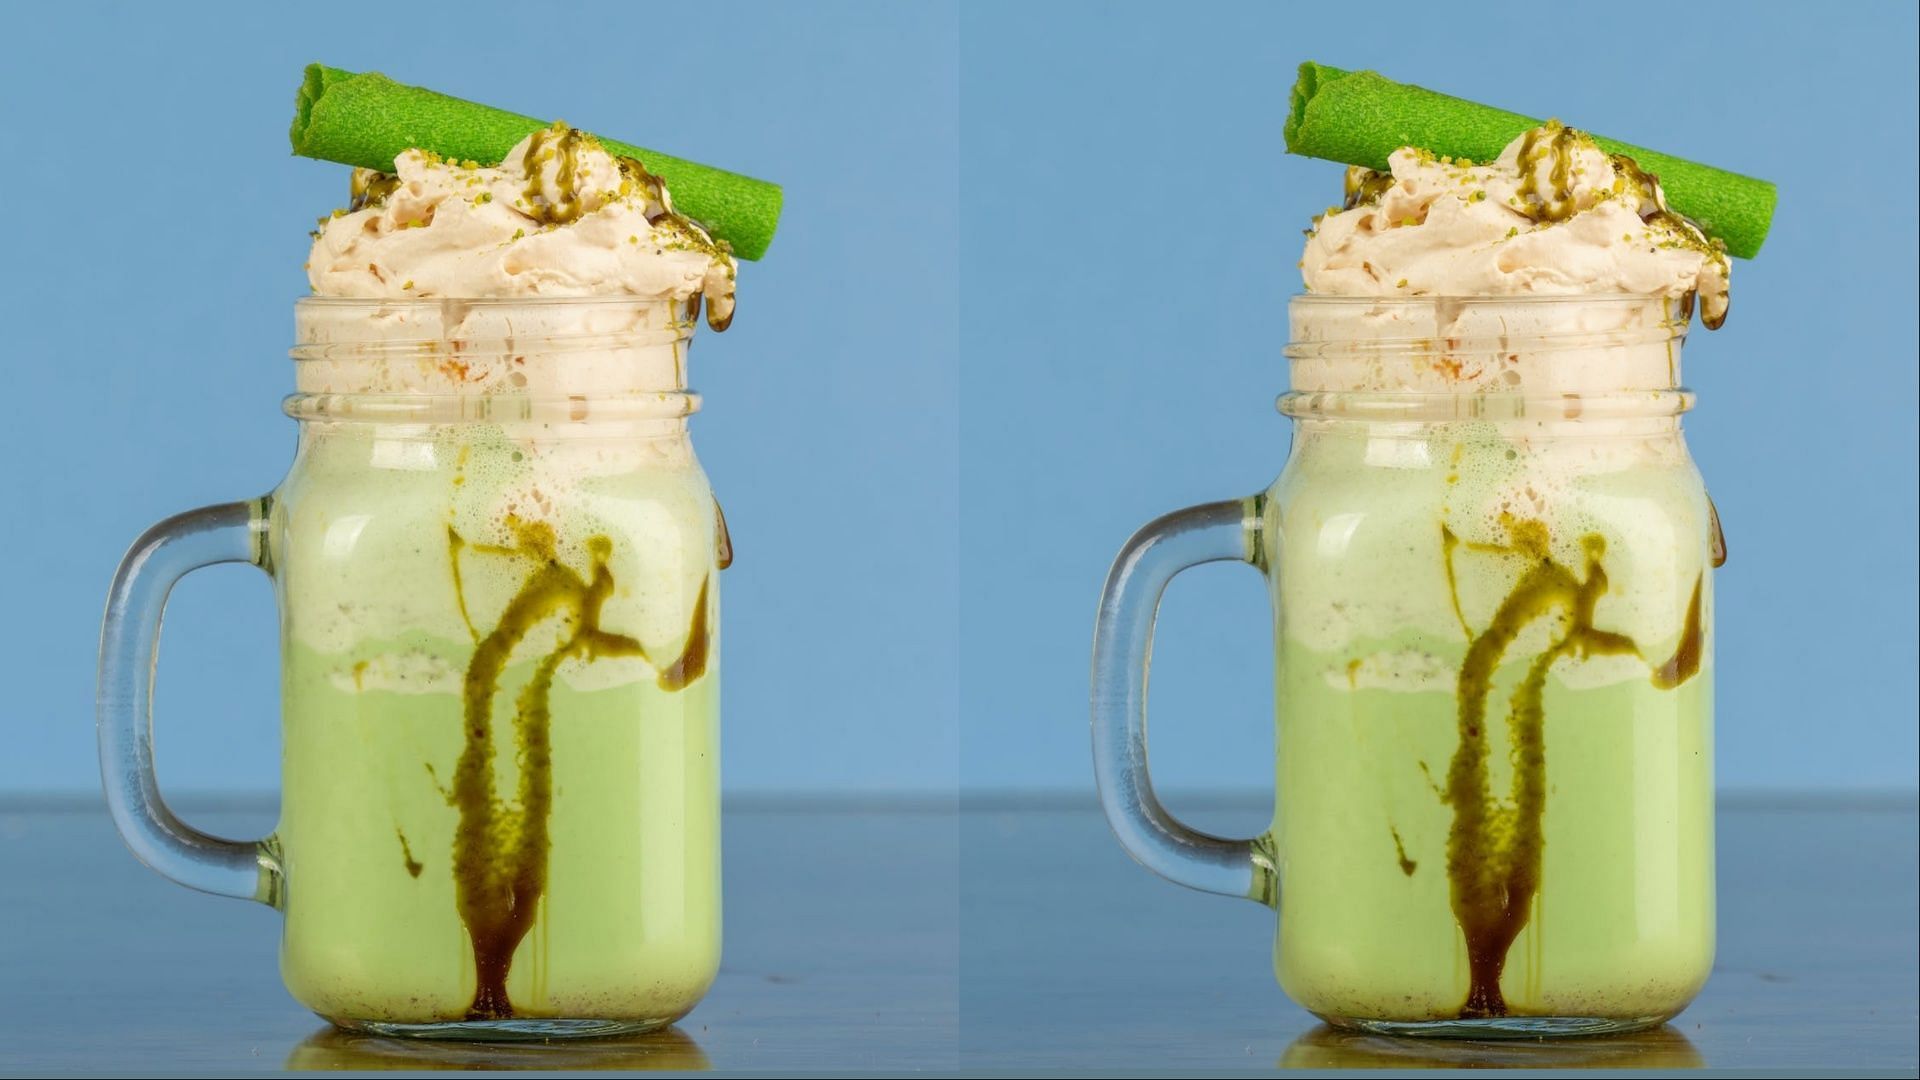 The Frozen Bean St. Patrick&#039;s Frappe is priced at $4.99 (Image via Denys Gromov / Pexels)